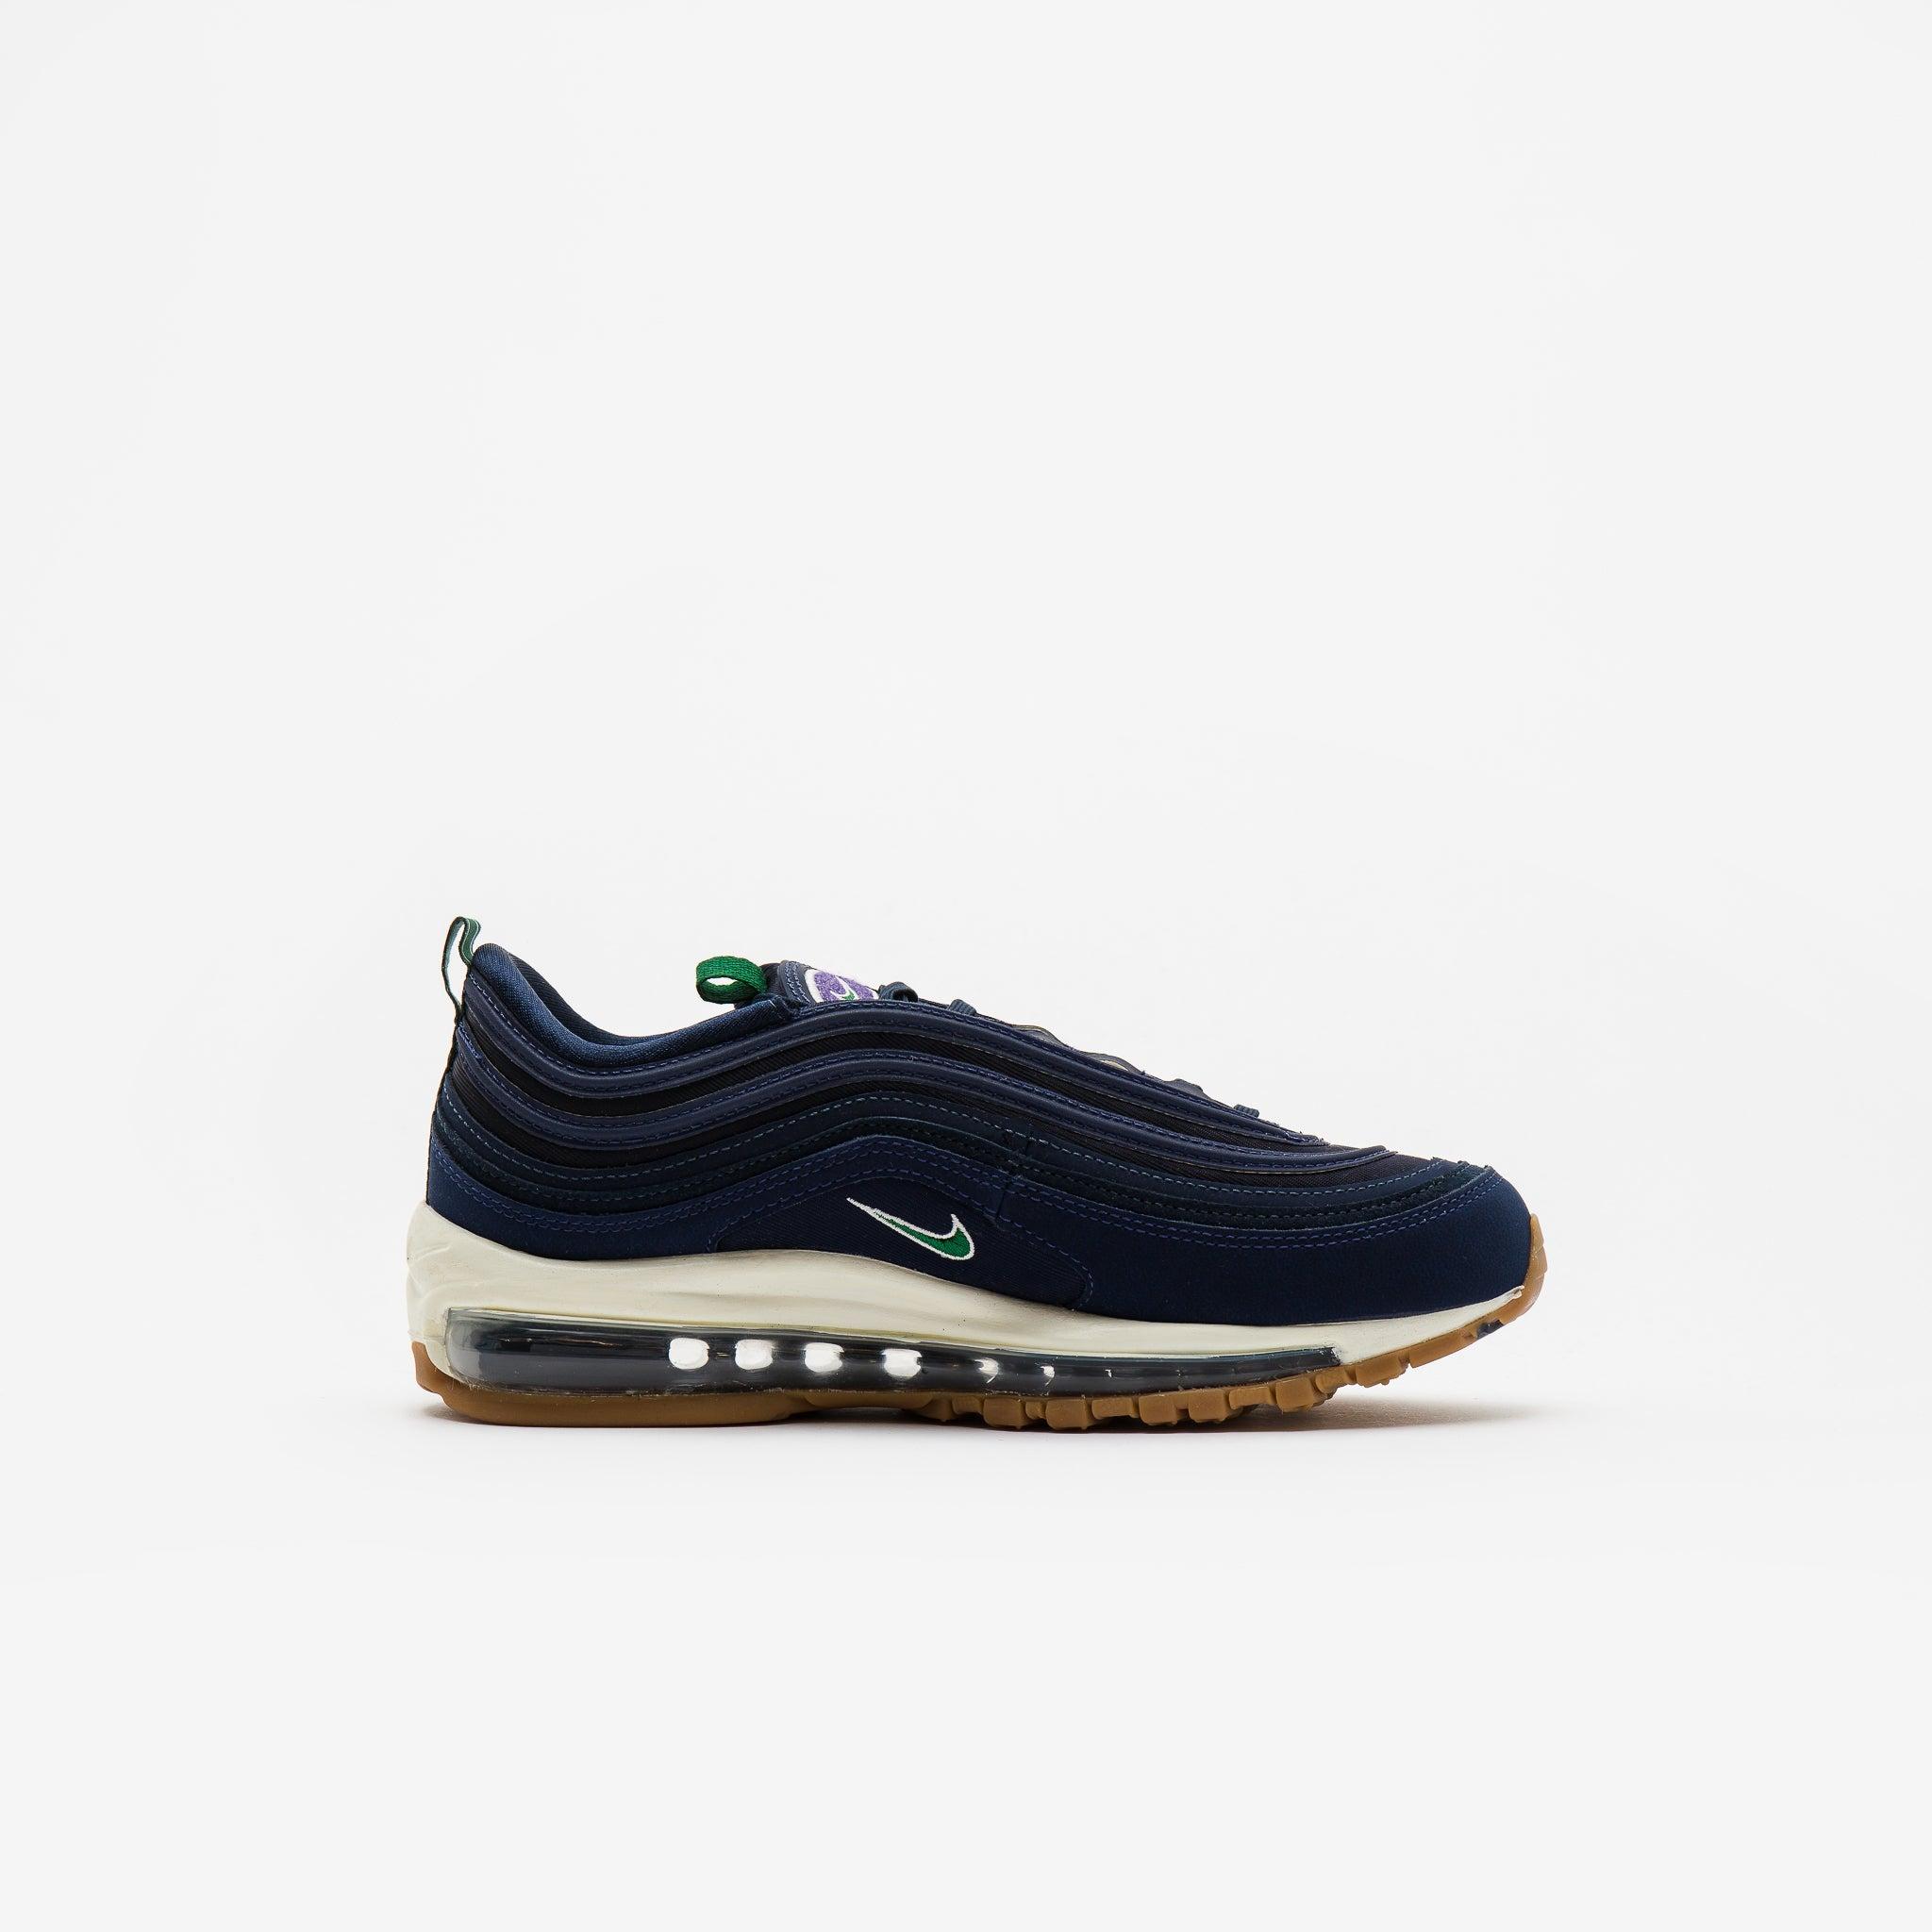 Nike Air Max 97 Shoes in Blue | Lyst